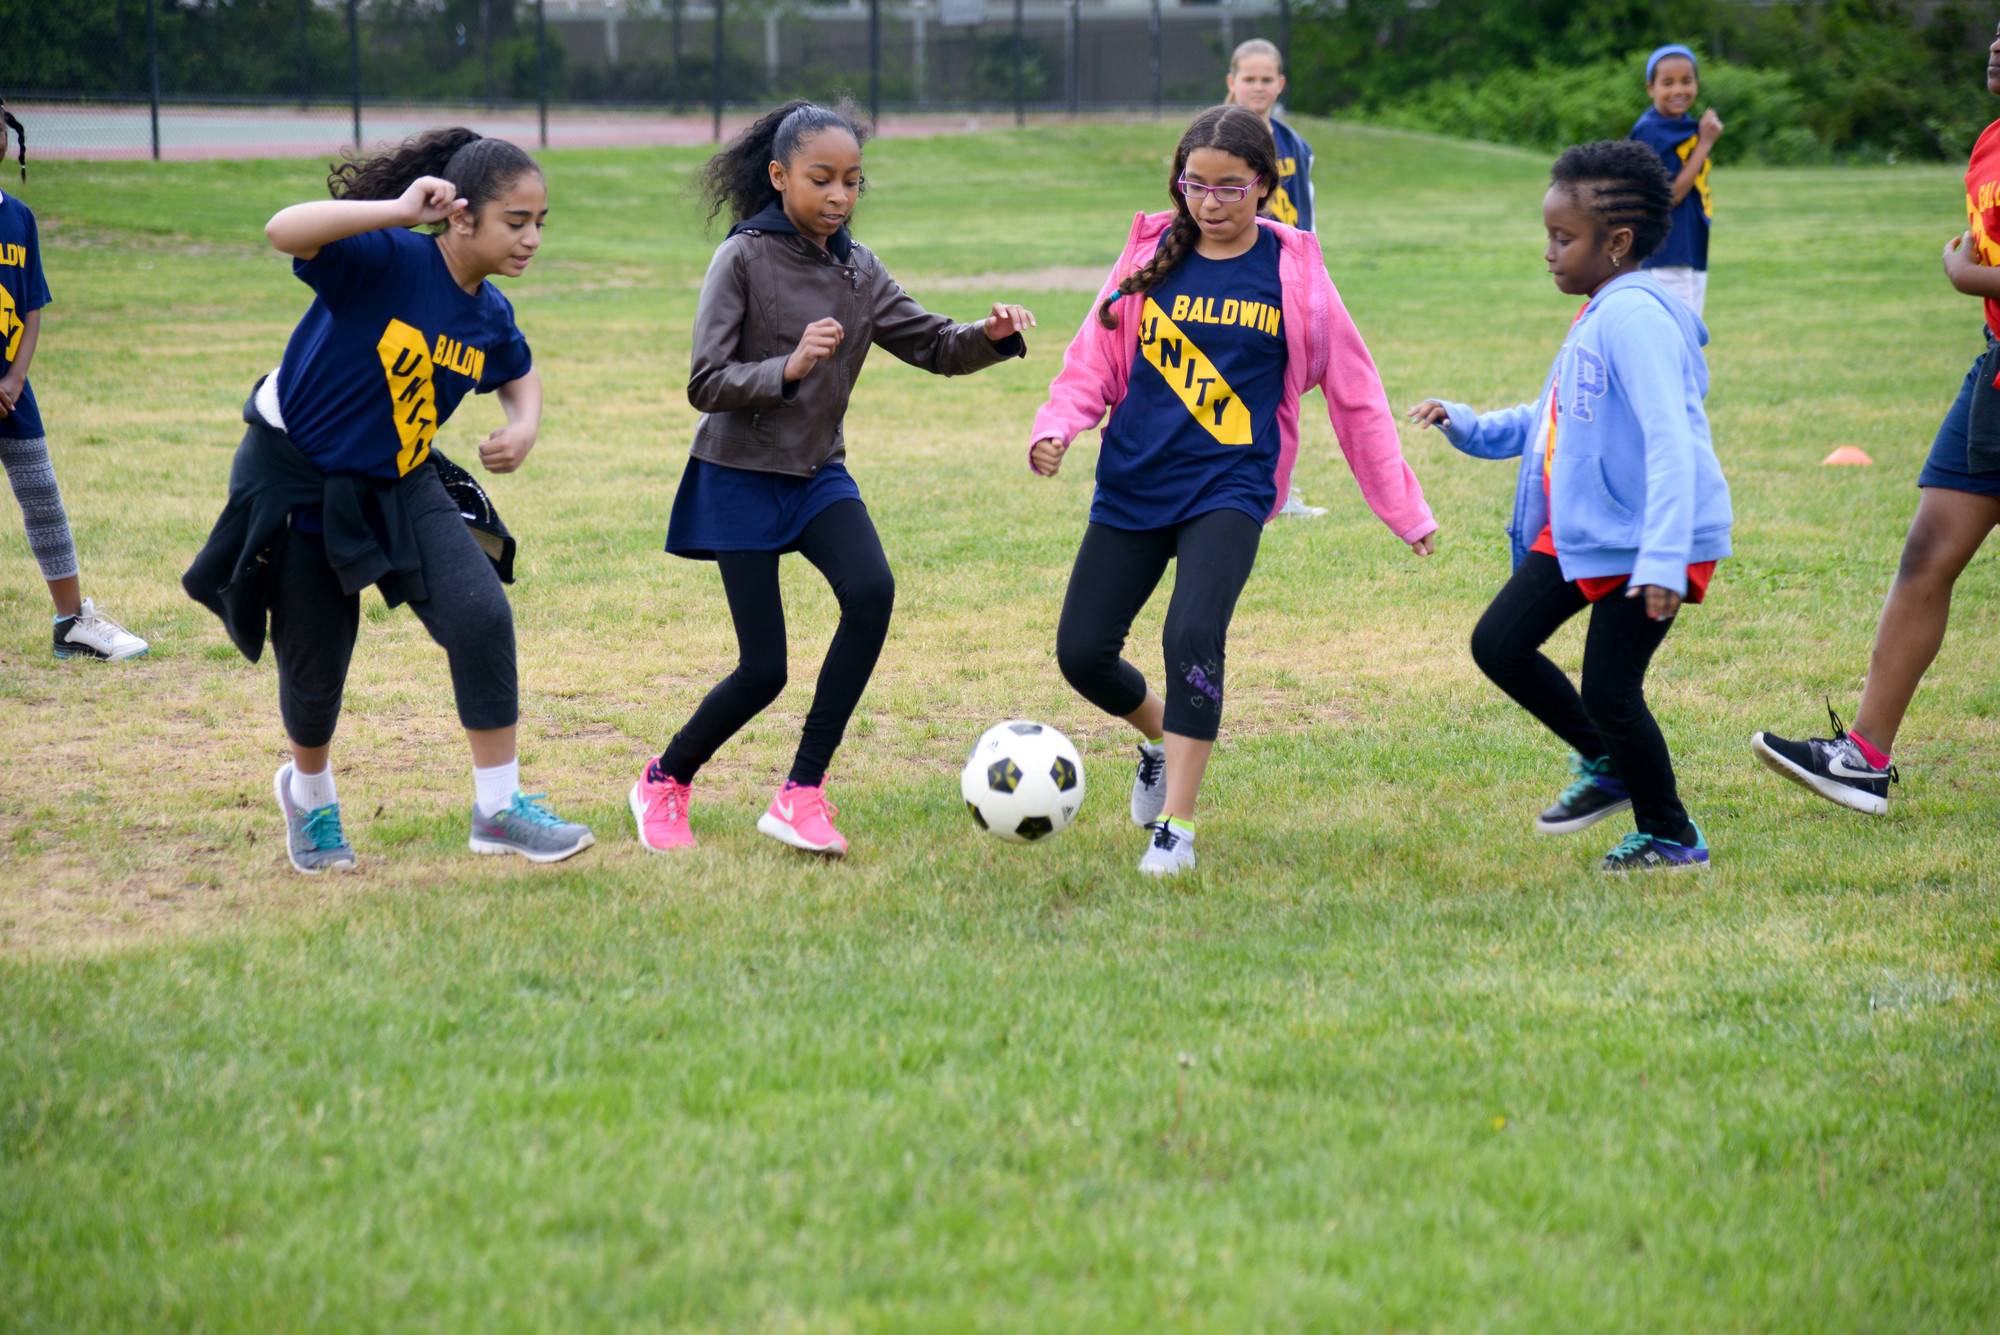 Friendly soccer games were played throughout the day as students got to know each other.